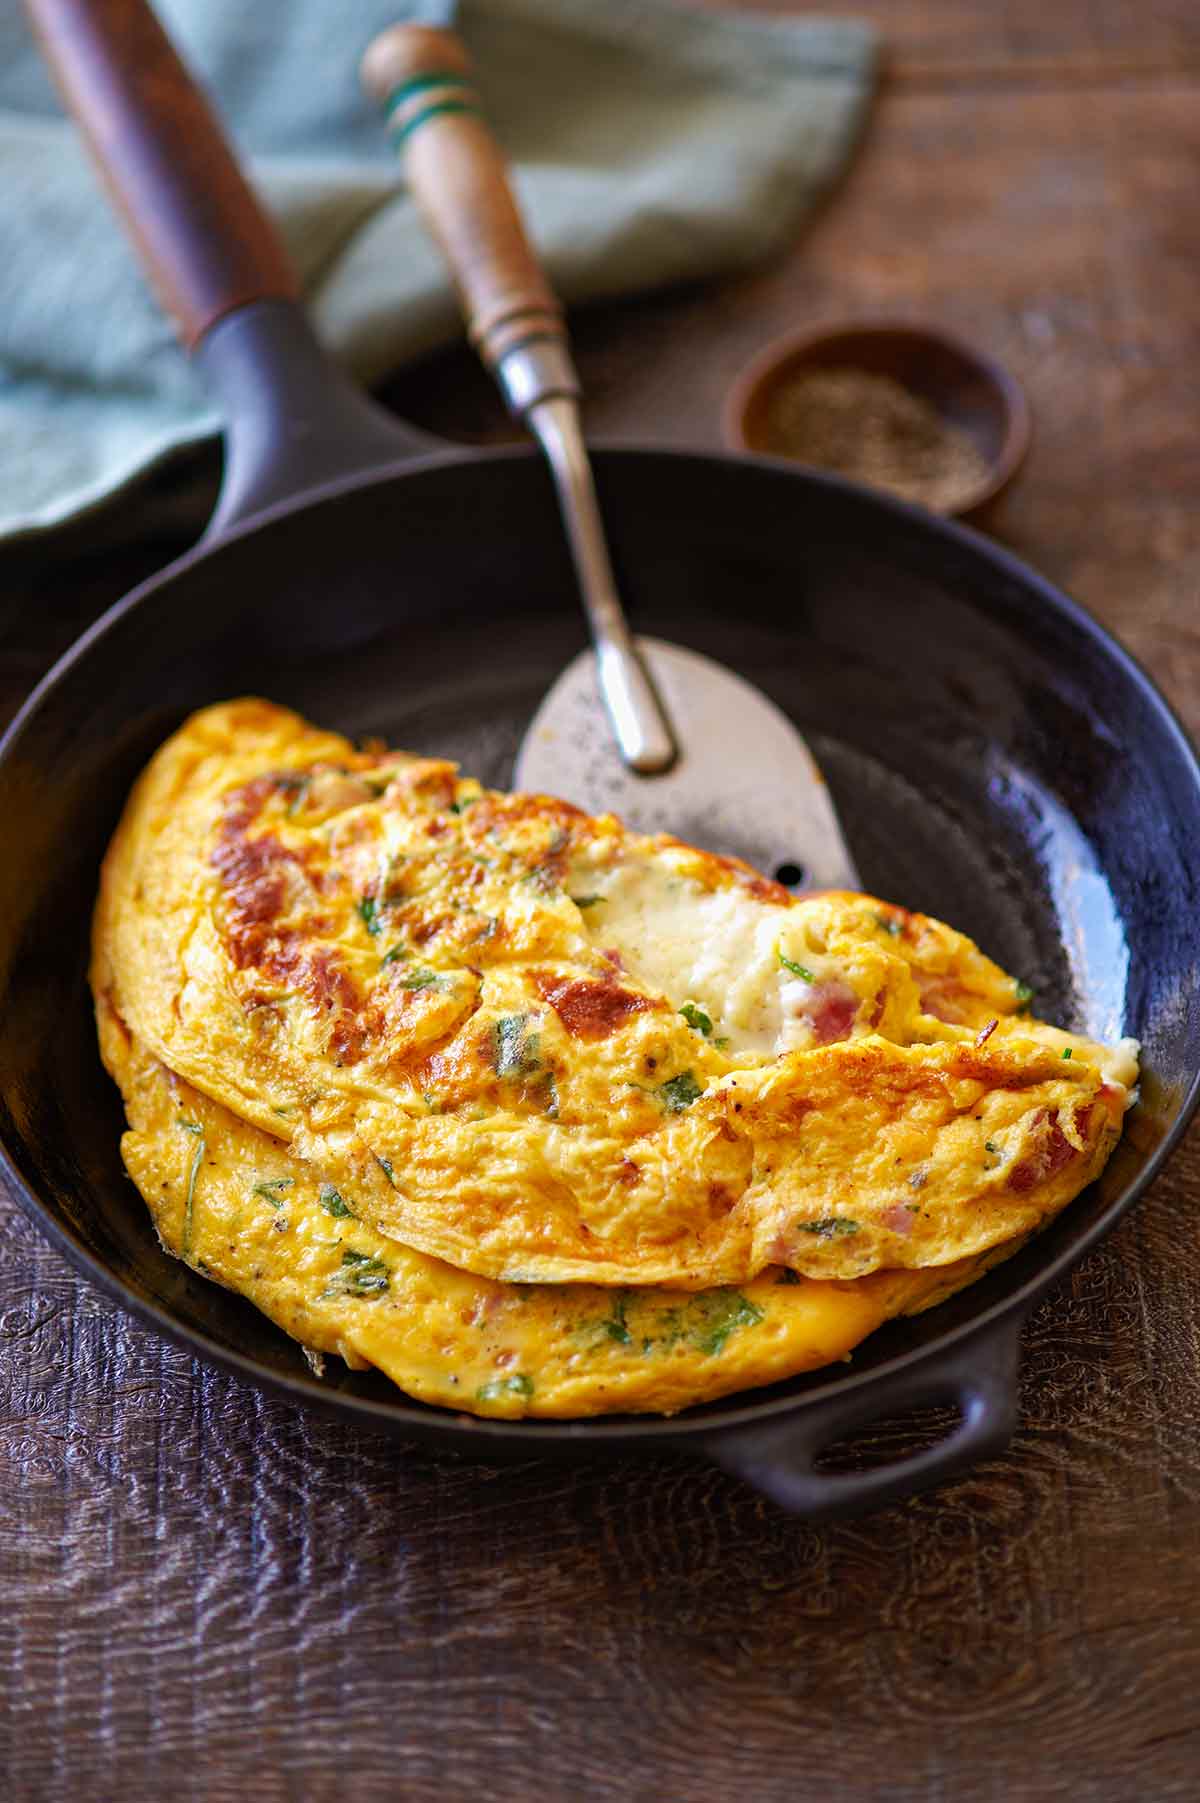 Ham And Cheese Omelet Recipe Leite S Culinaria,Streusel Topping